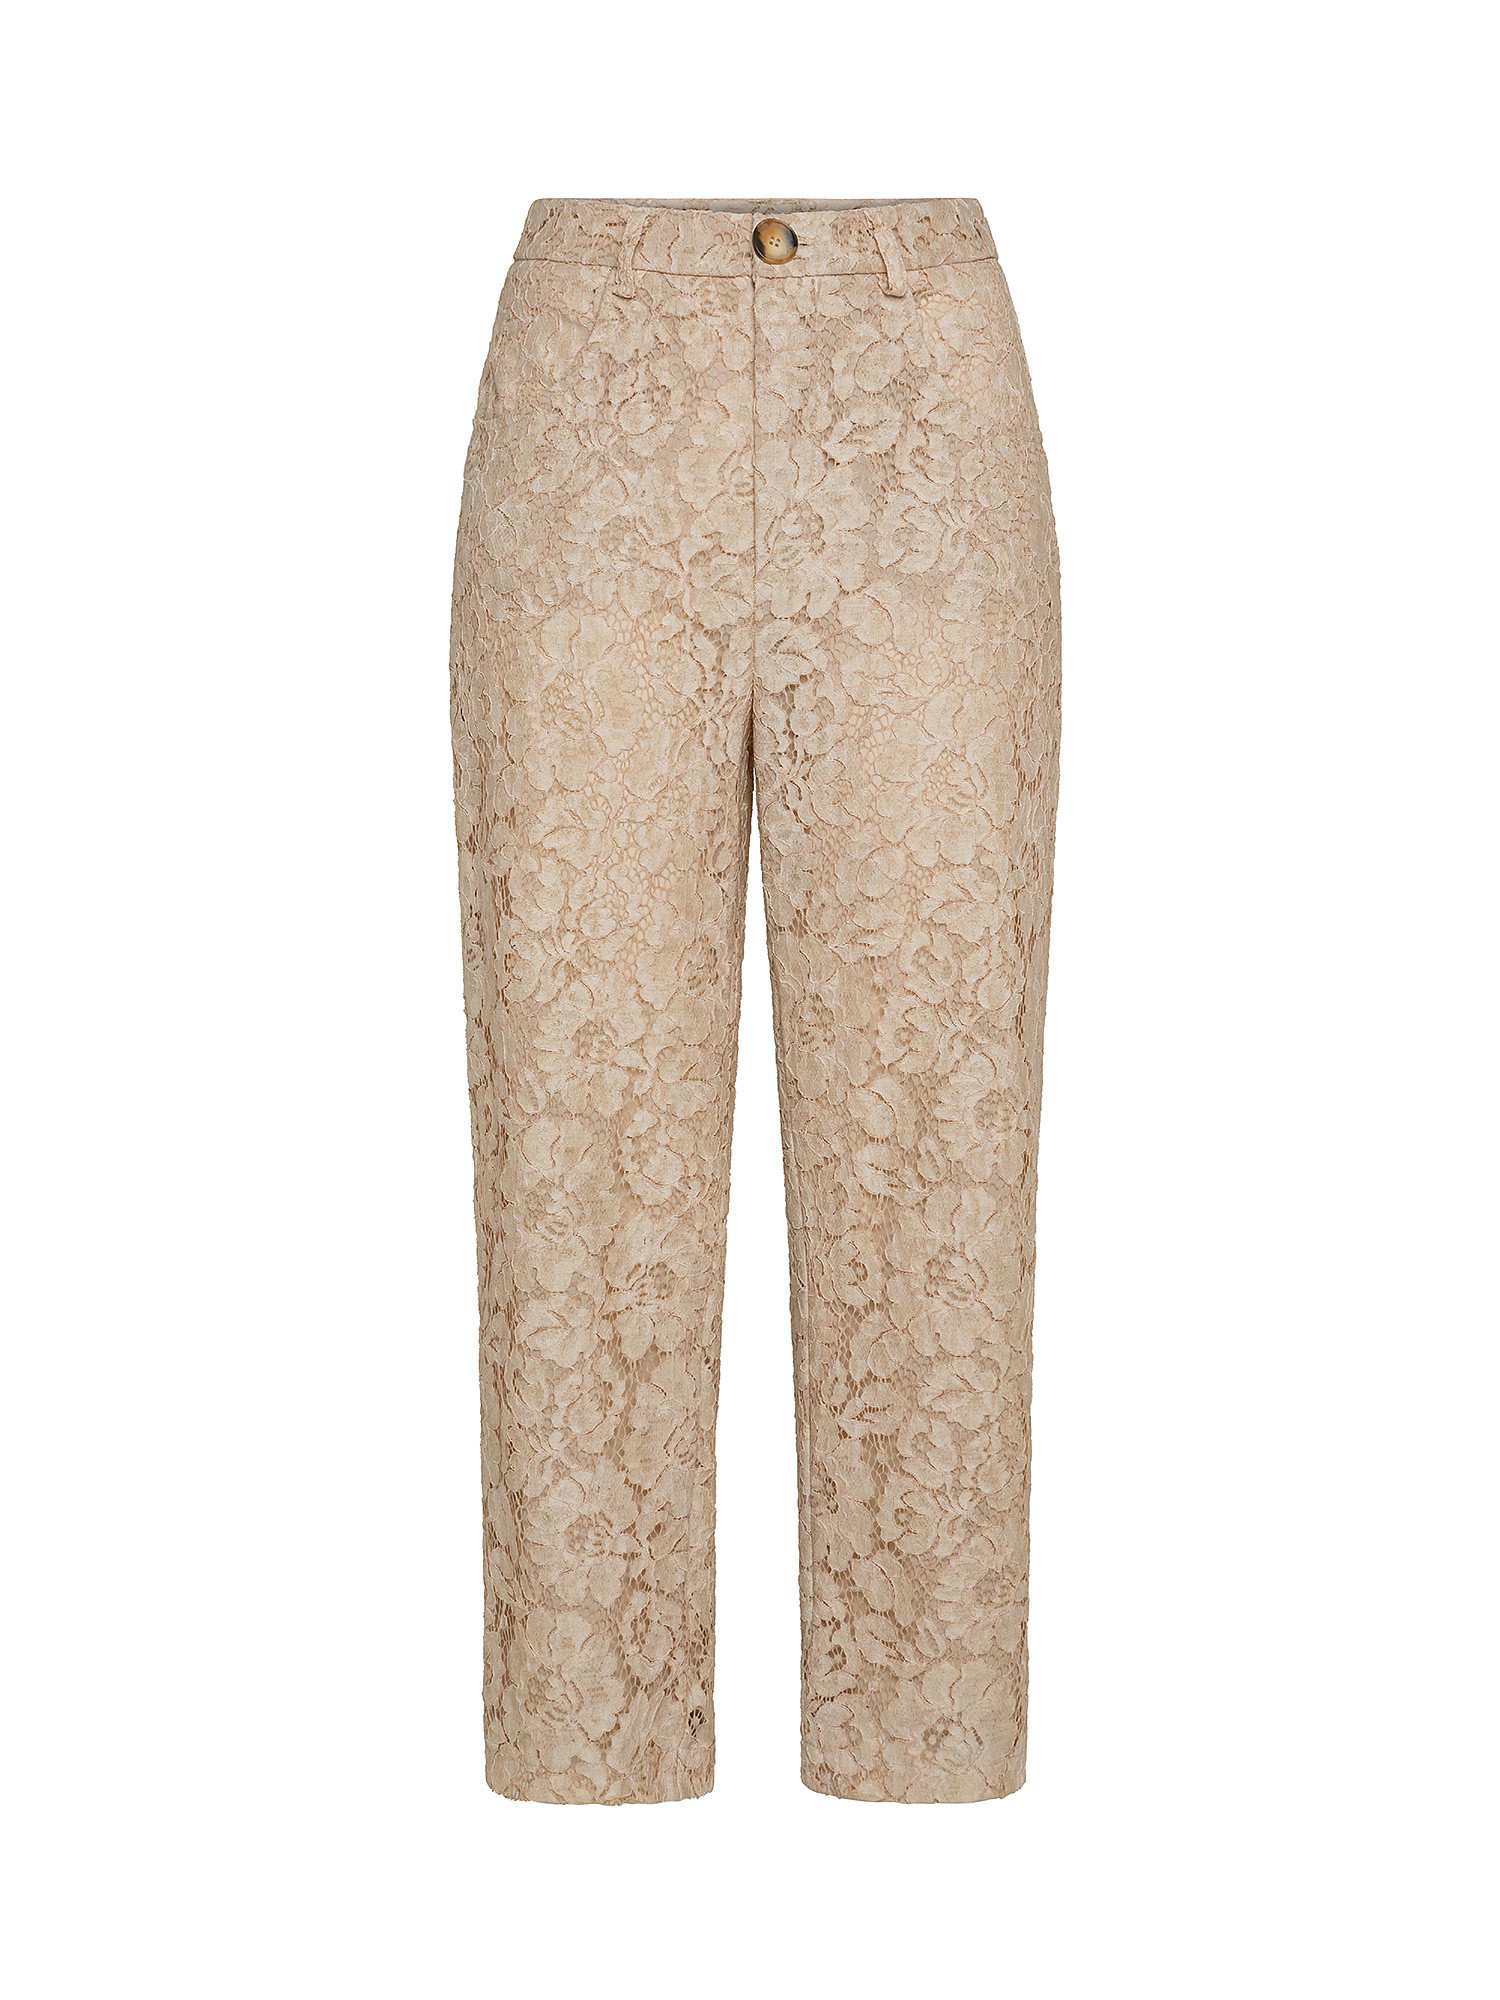 Trousers, Beige, large image number 0